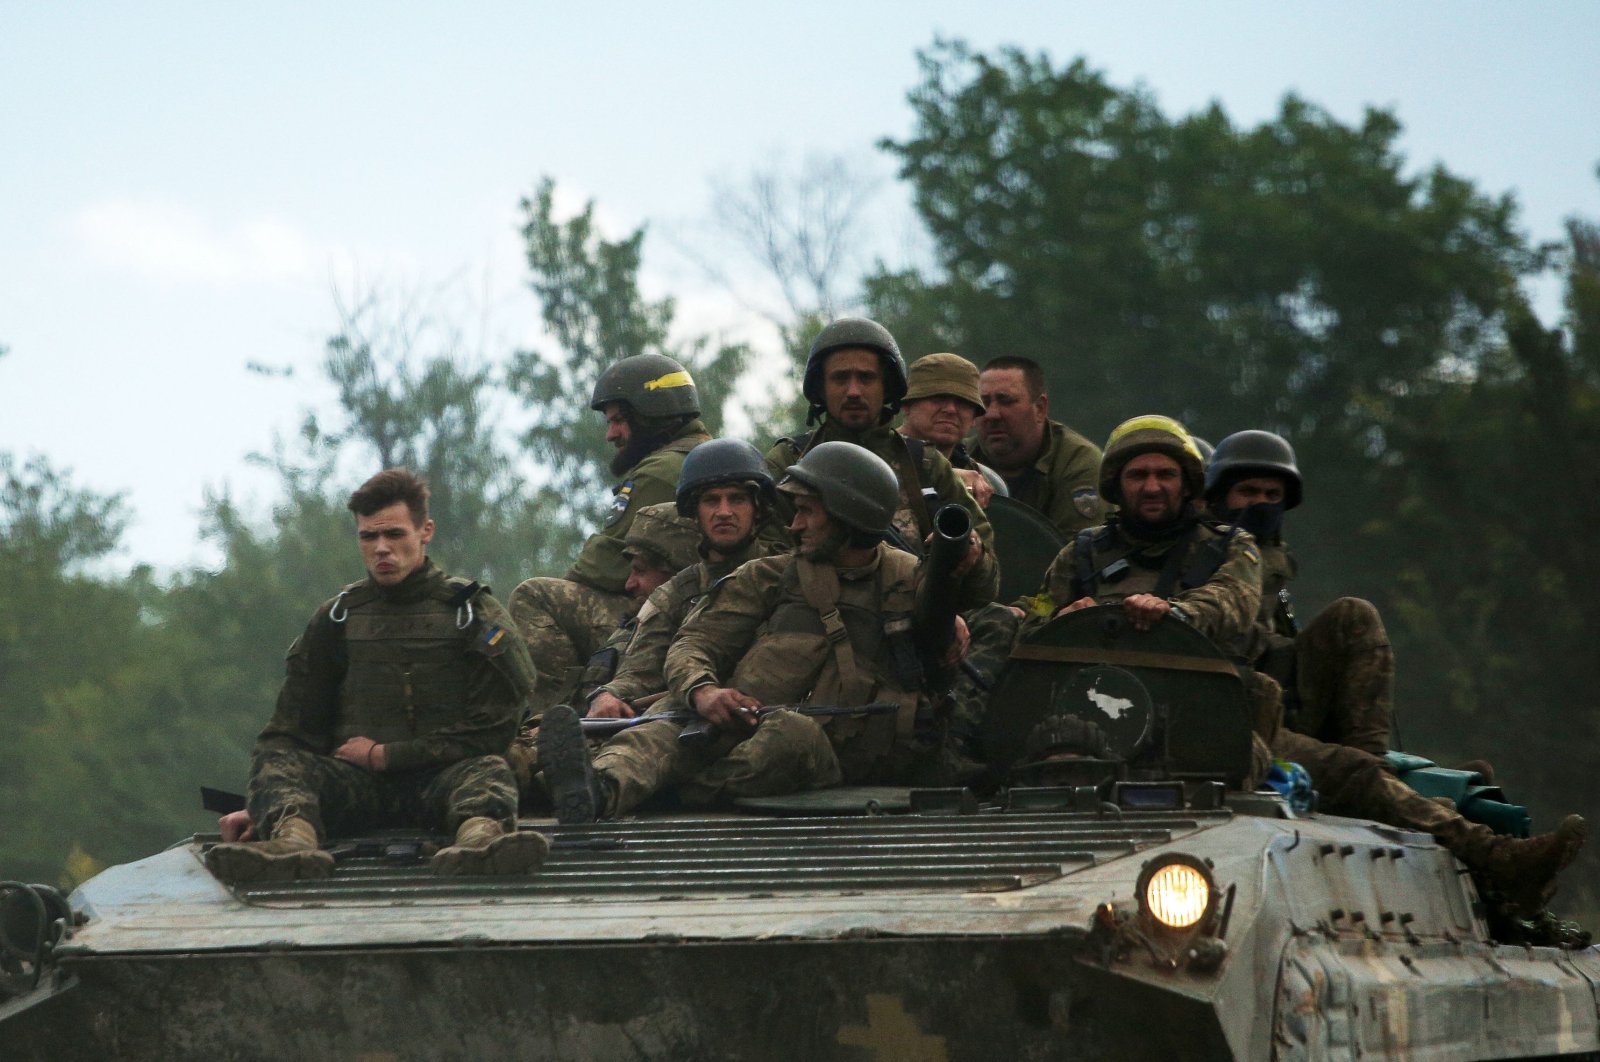 Ukrainian soldiers ride on an armored personnel carrier (APC) on a road of the eastern Luhansk region, Ukraine, June 23, 2022. (AFP Photo)